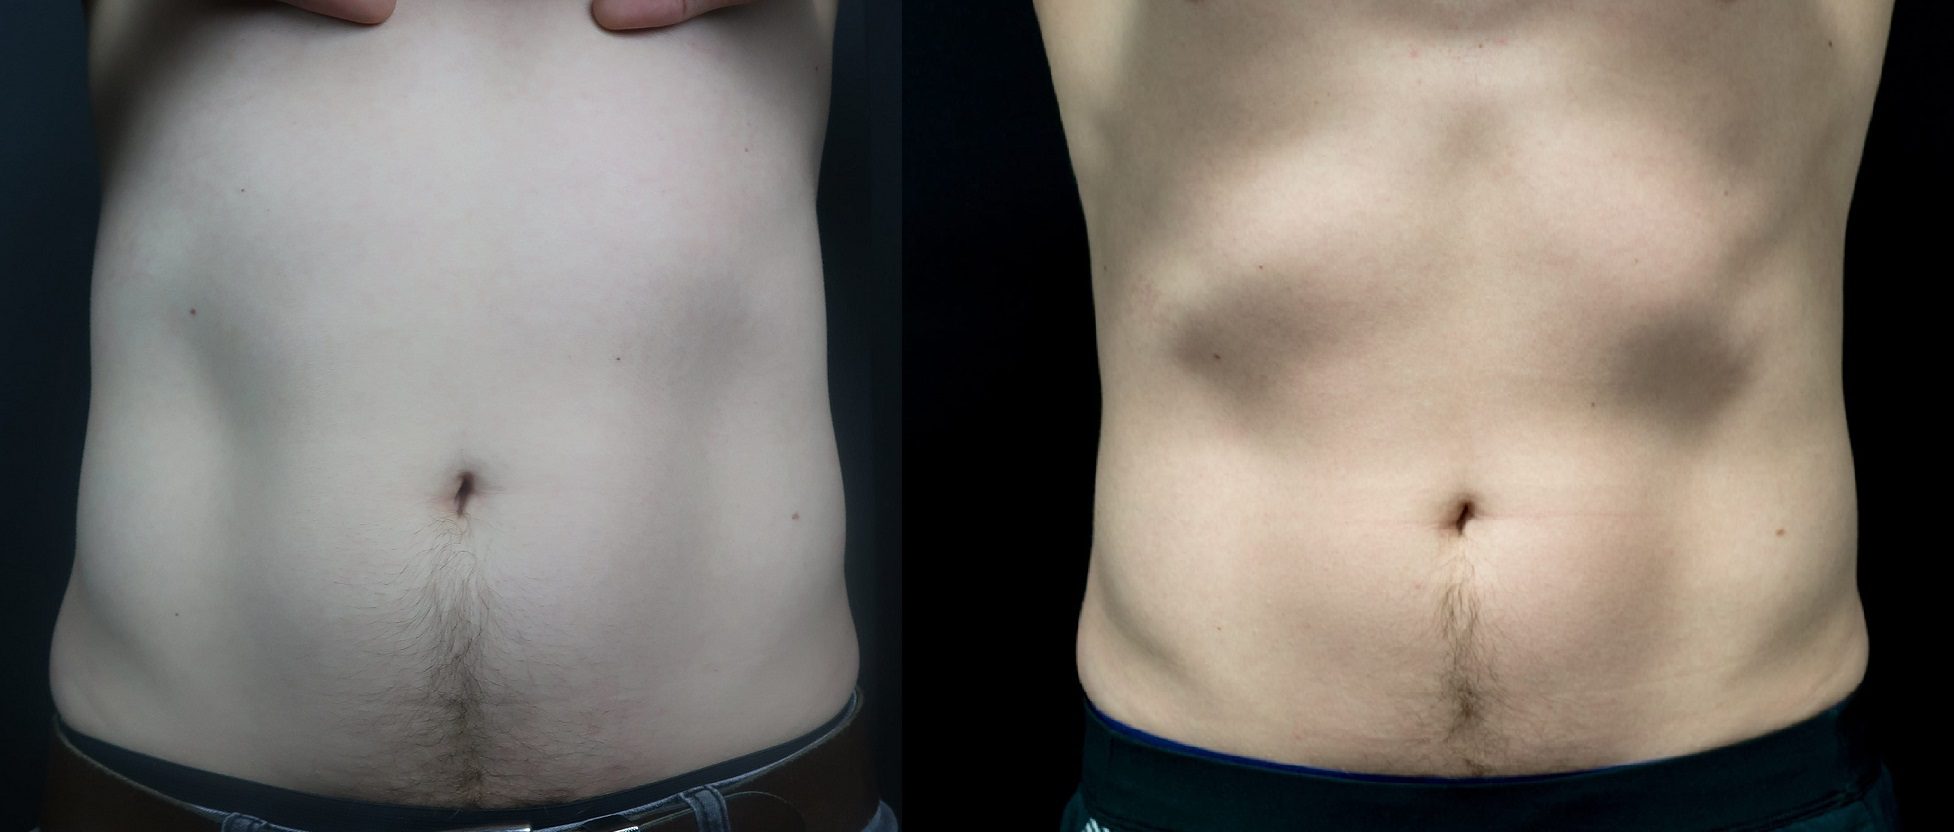 coolsculpting before and after belly fat